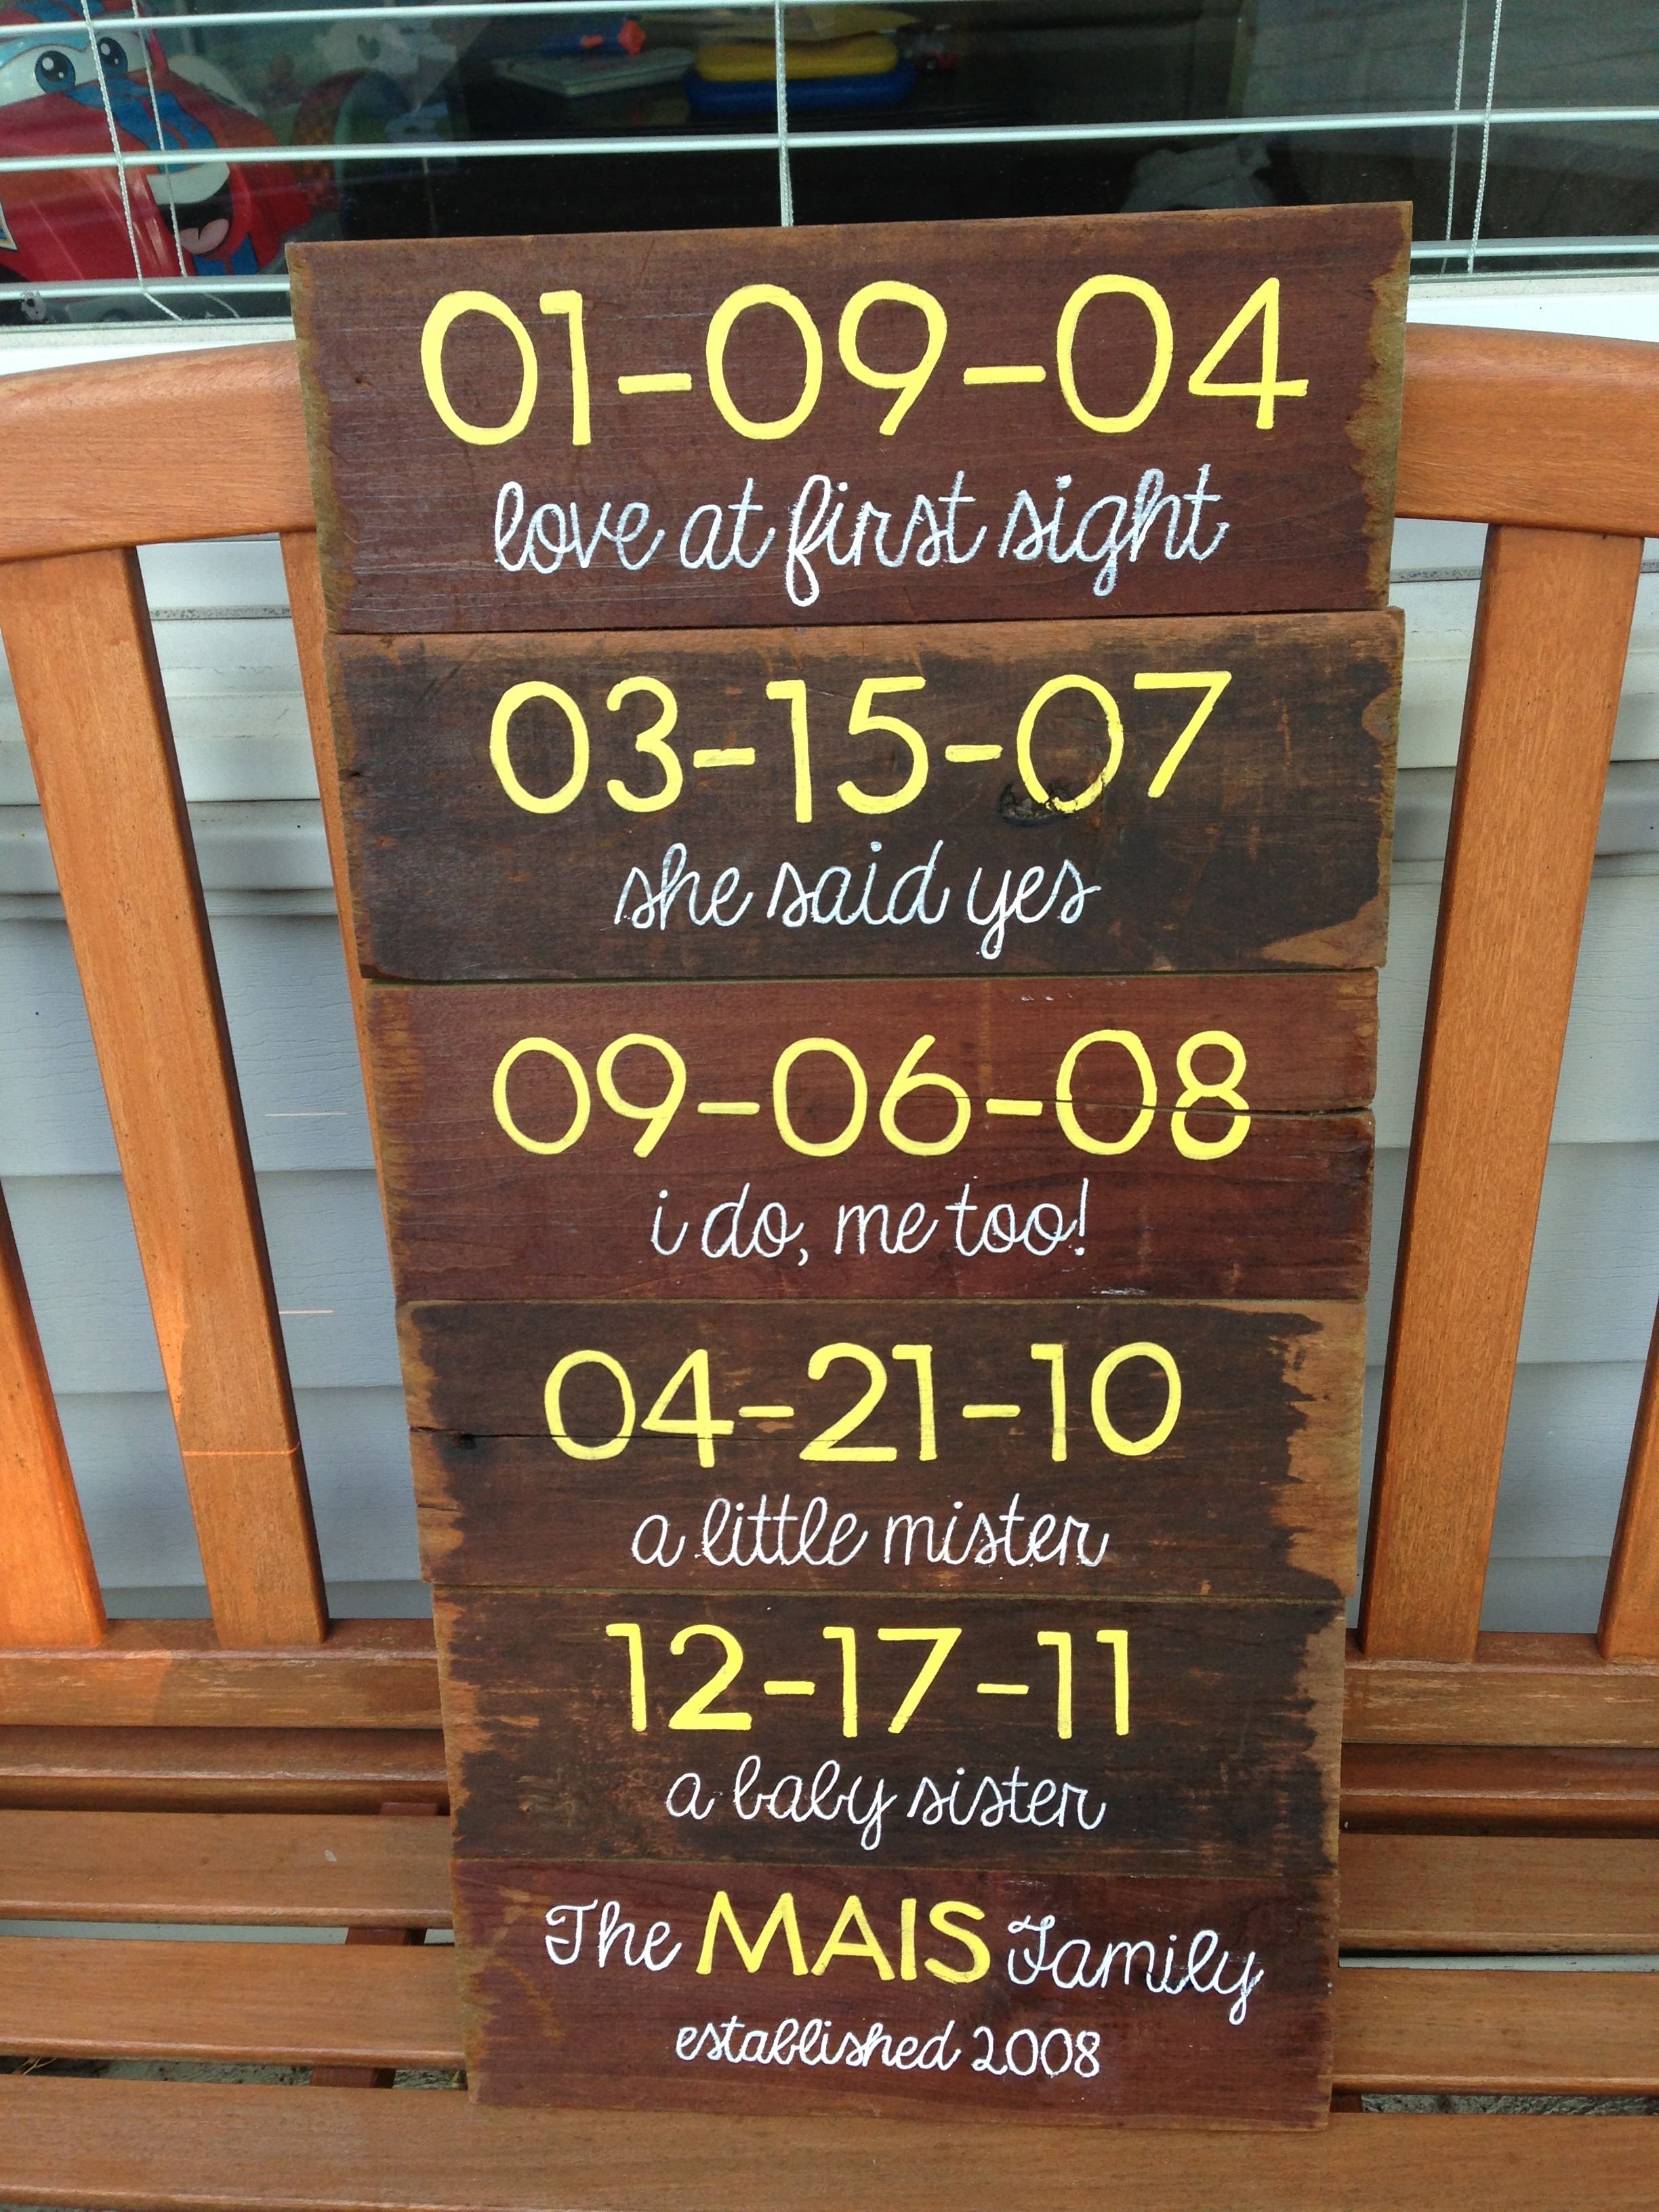 10 Awesome Ideas For 5 Year Anniversary 5 year anniversary gift wood panels with special dates crafty 2 2023